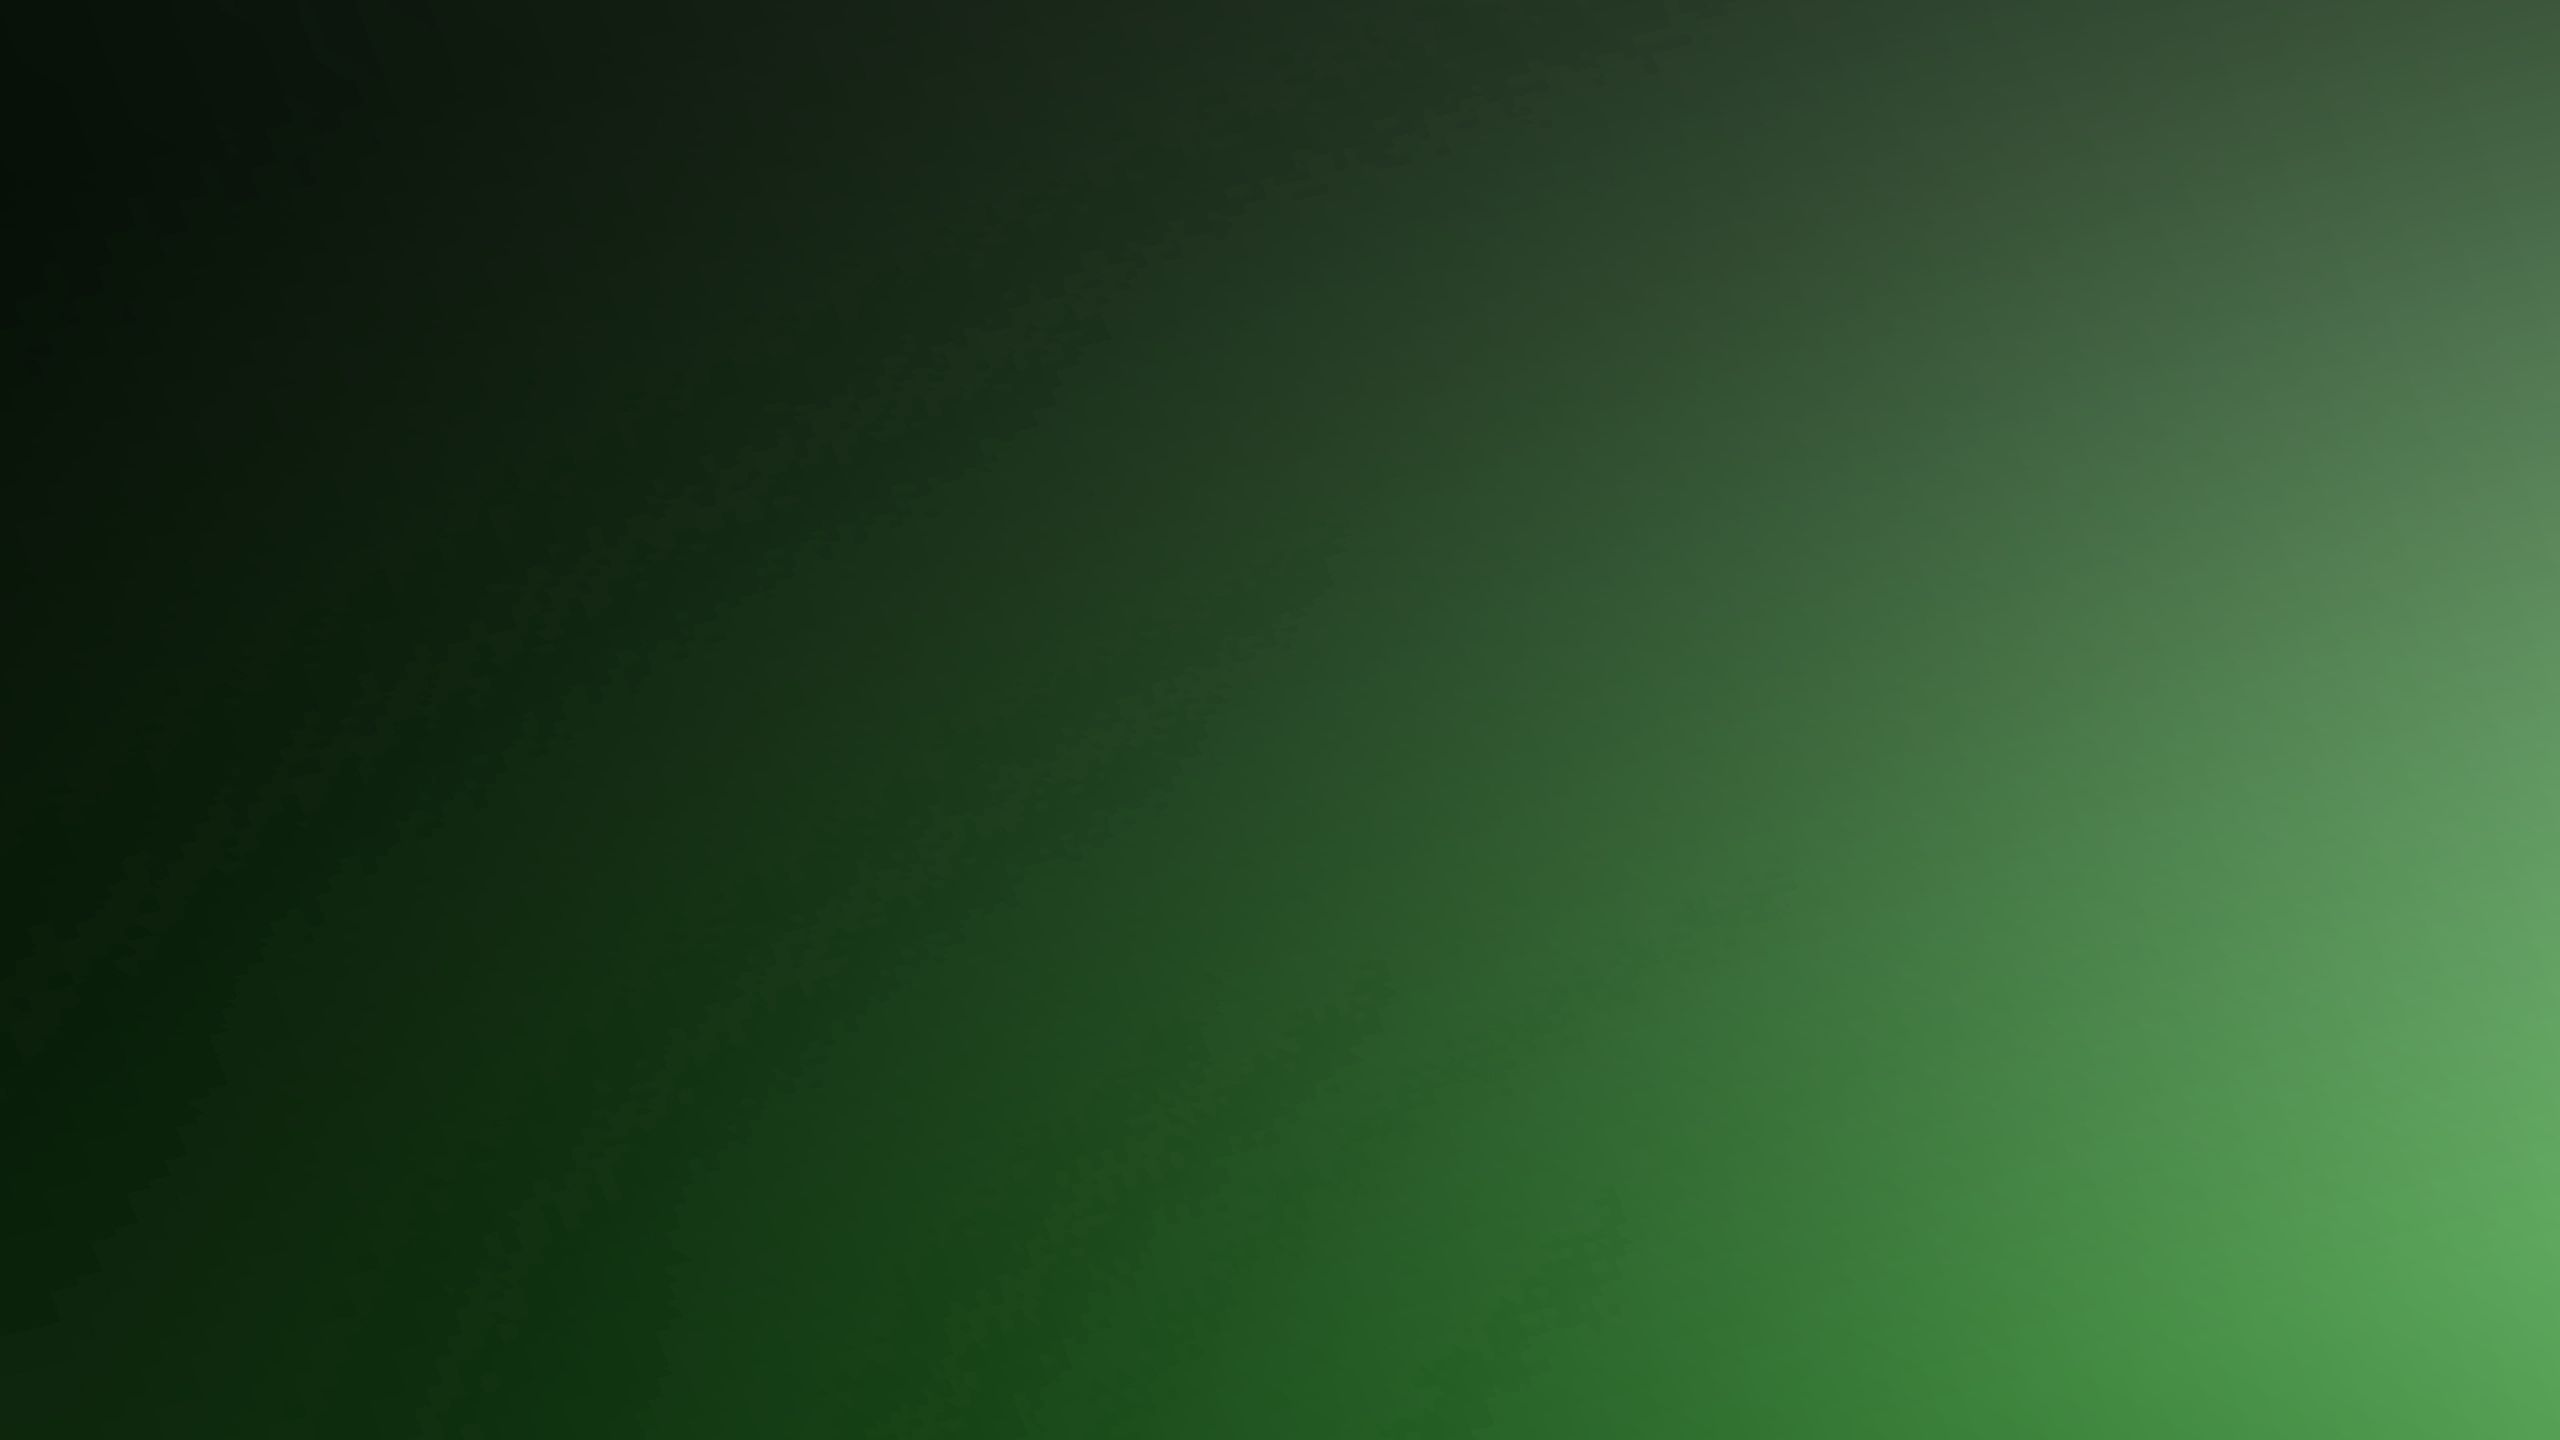 Download wallpaper 2560x1440 green, background, texture, solid, color ...